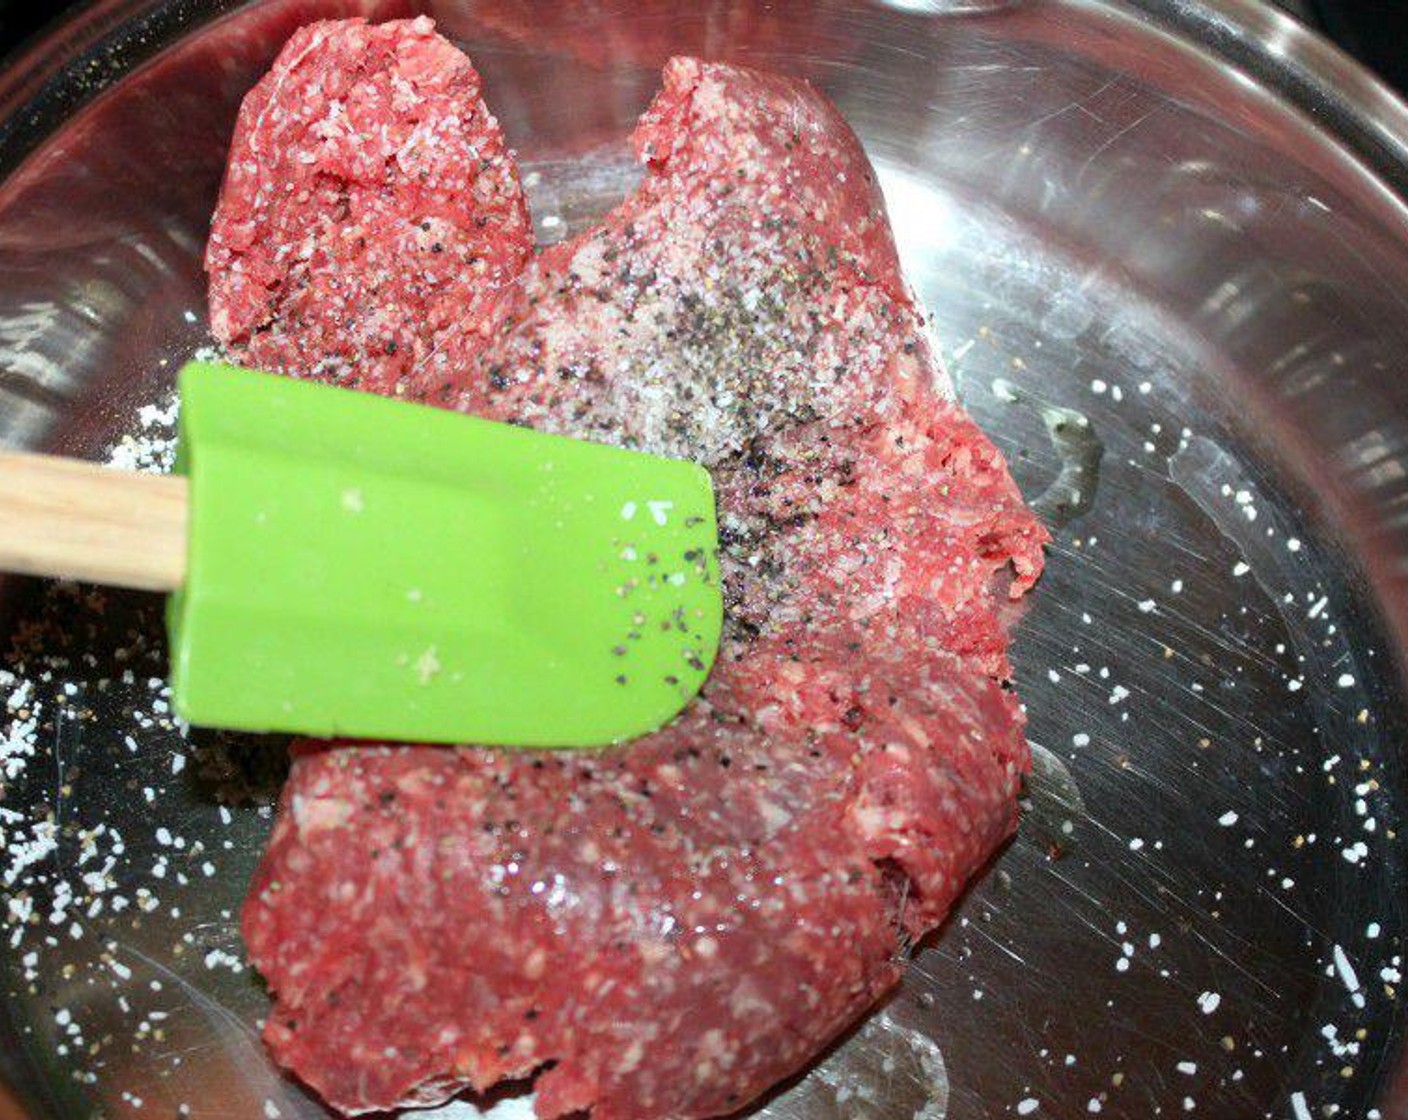 step 1 In a medium-large pan, cook up the Lean Ground Beef (1 lb) with some Salt (to taste) and Ground Black Pepper (to taste).